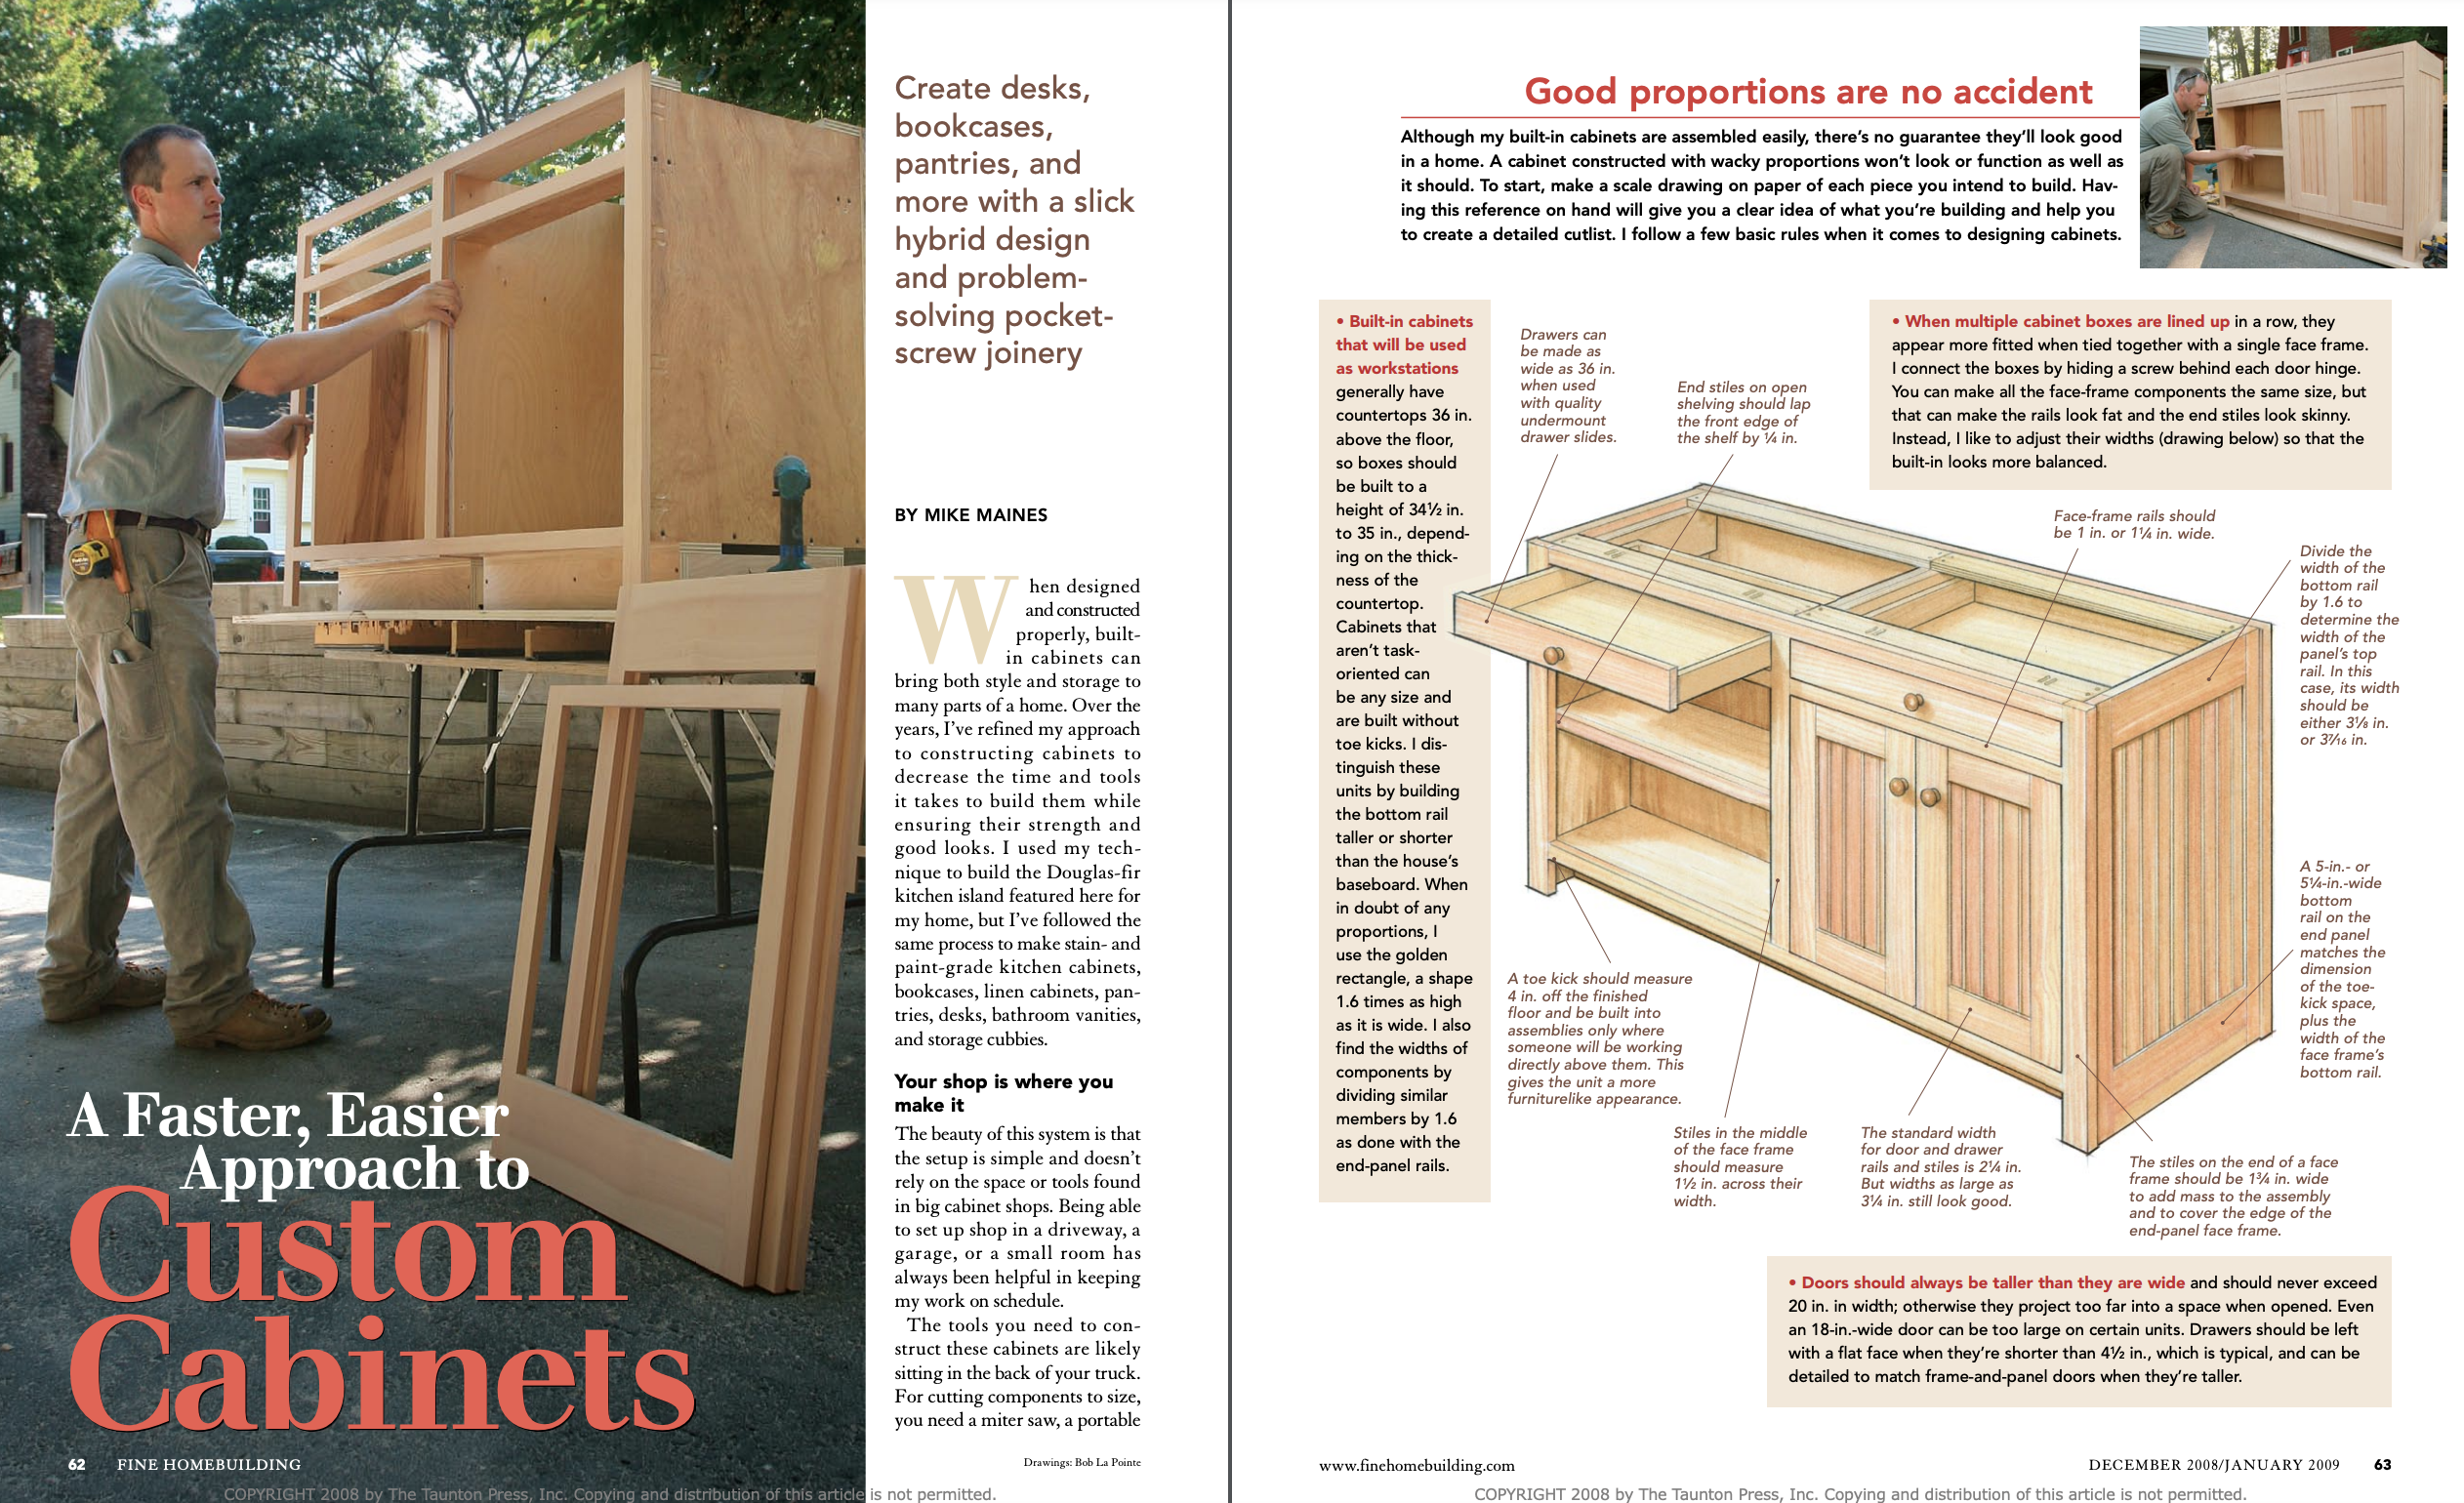 How a master carpenter built custom-made cabinets and cases for a